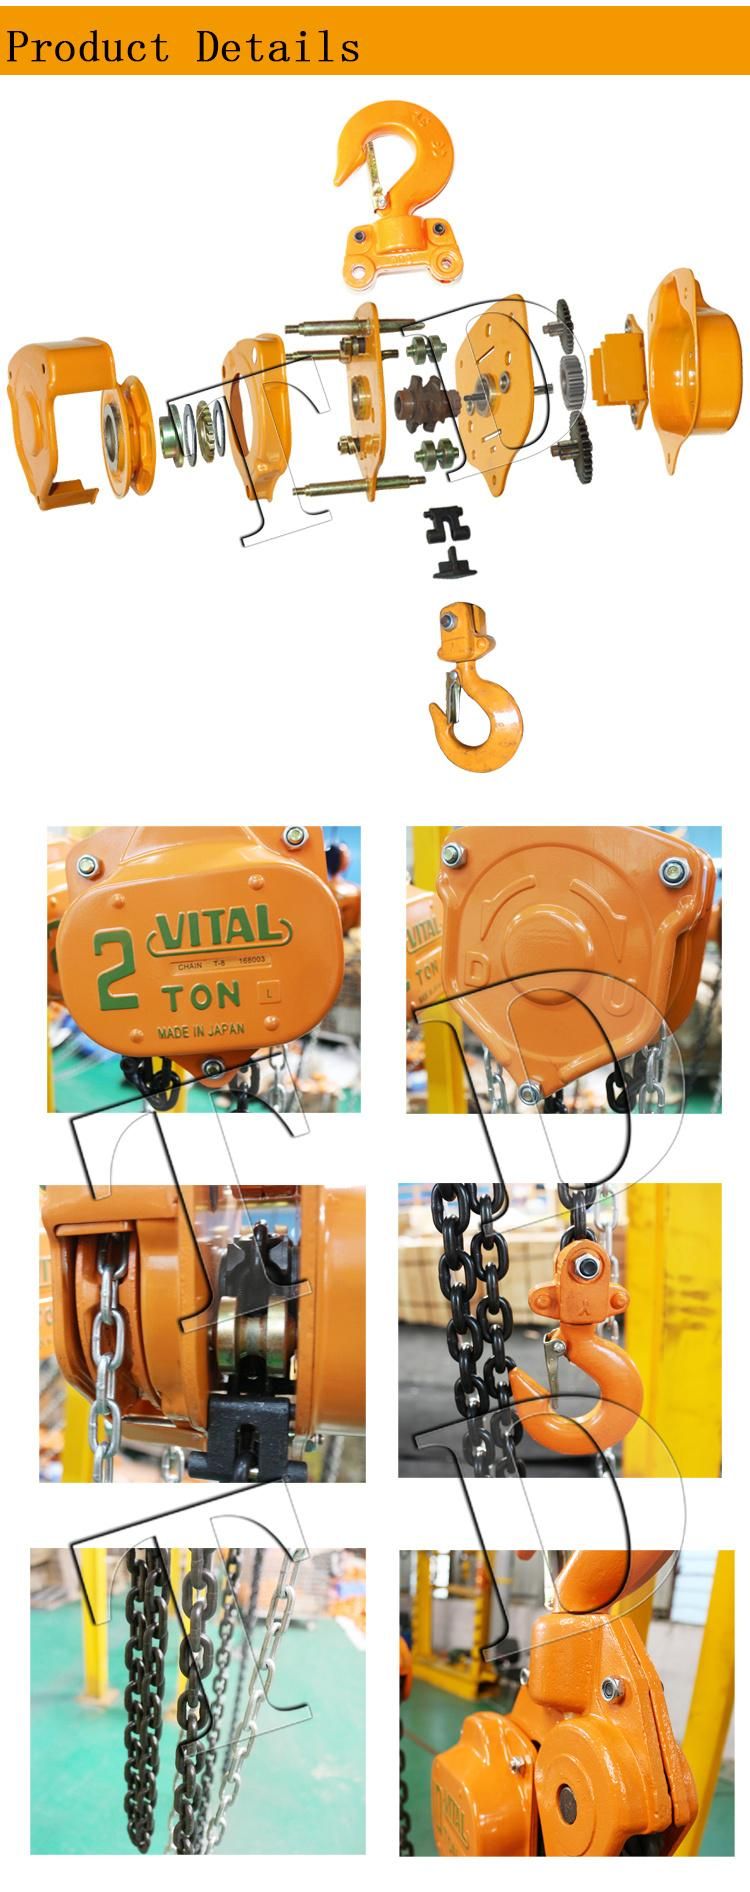 High Quality 1ton 2ton 3ton Vital Chain Block with G80 Chain Best Selling Now